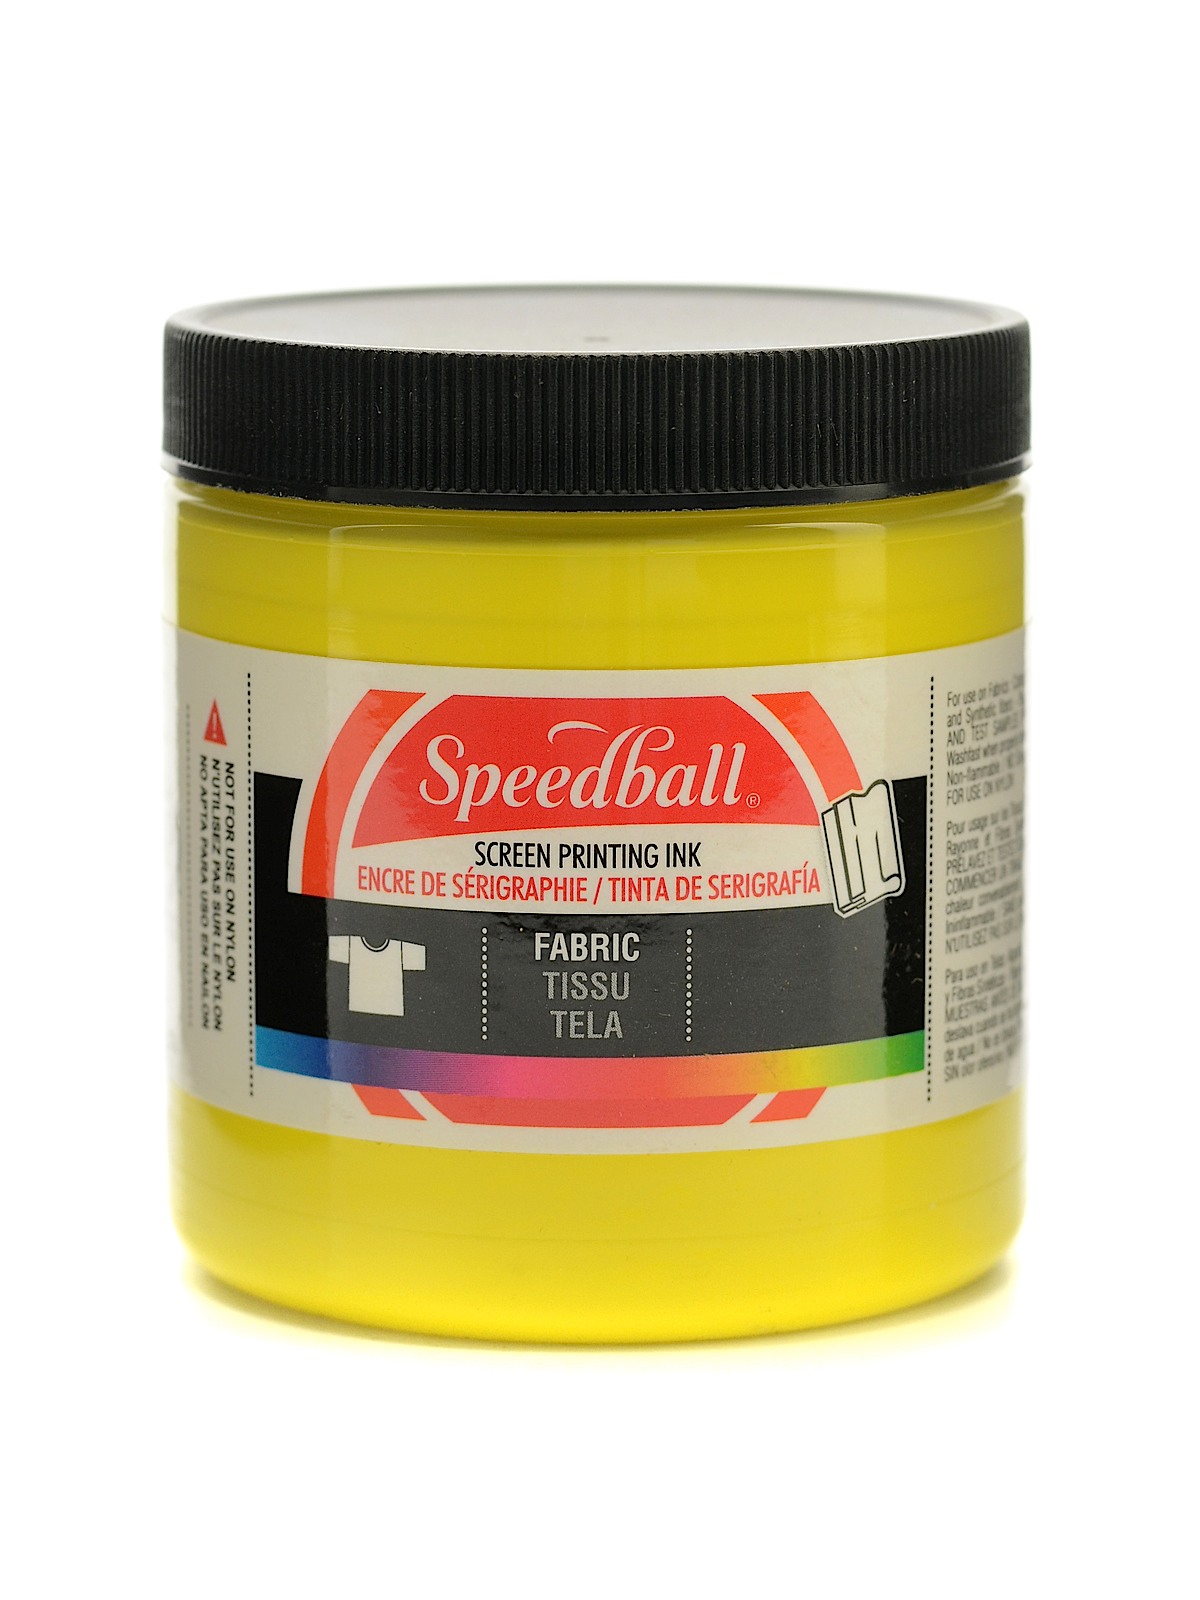 Speedball 4550 Fabric Screen Printing Ink 8oz Violet for sale online